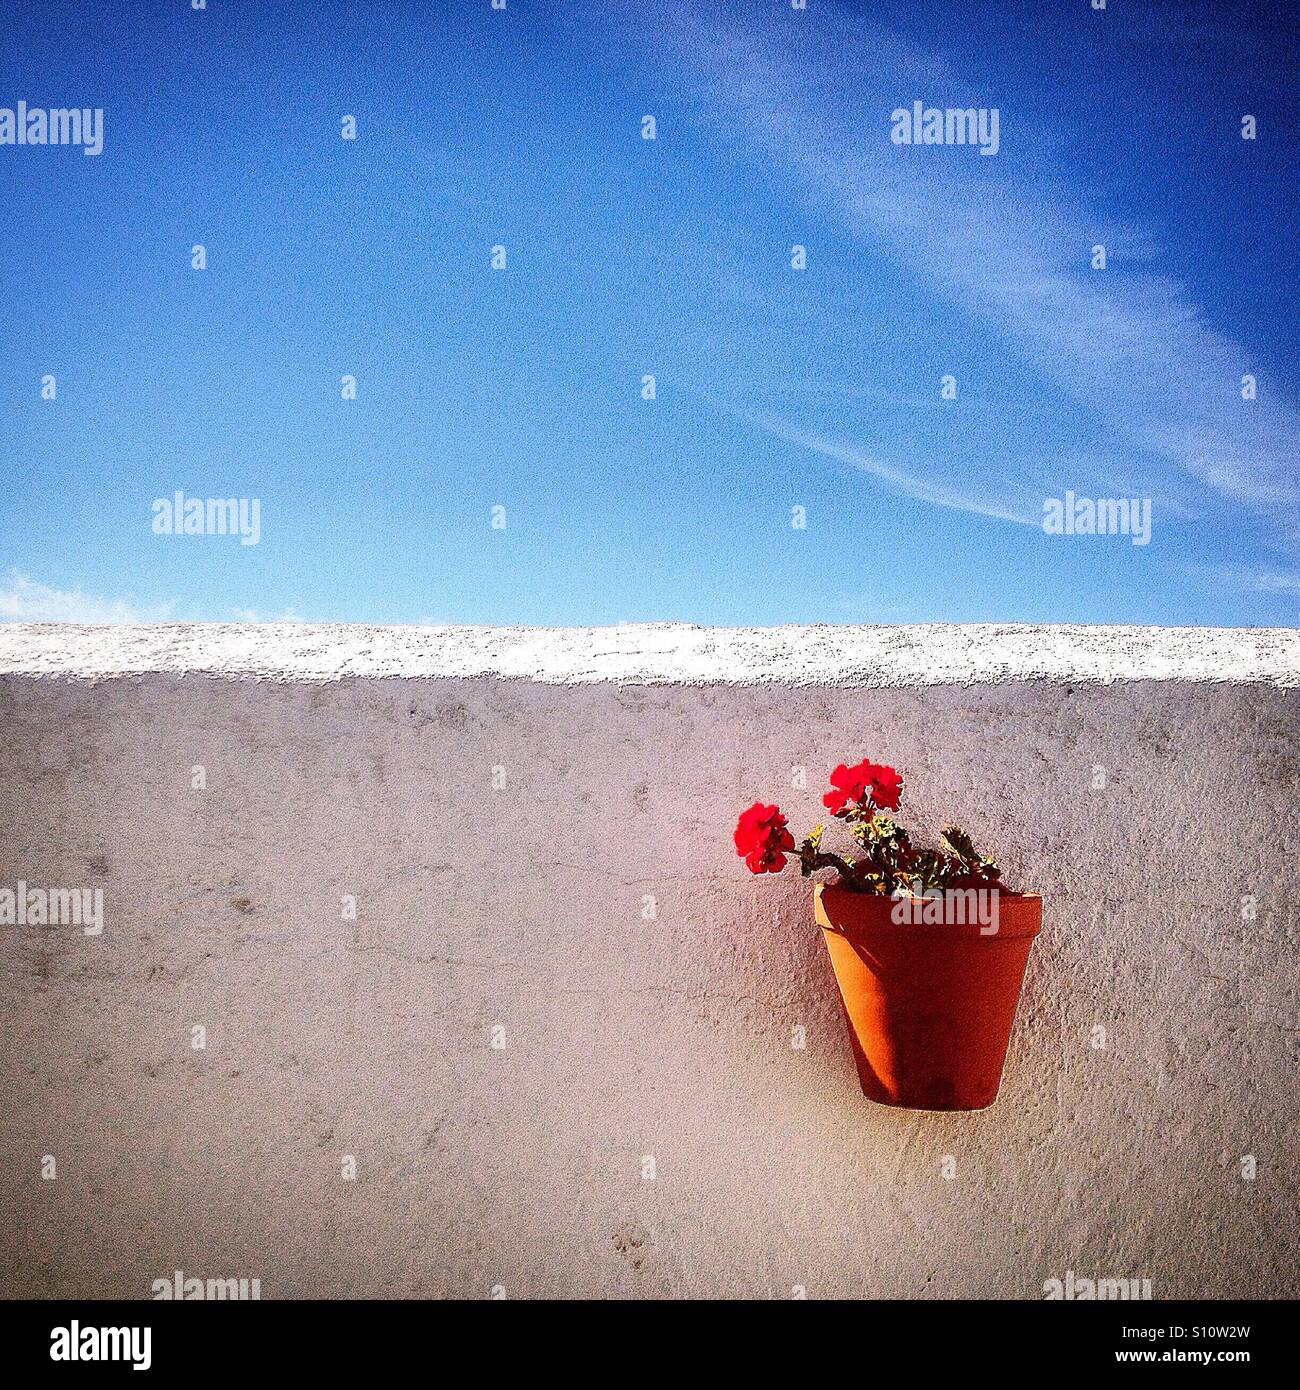 A flower pot on a white wall and the blue sky covered by a chemtrail in El Gastor, Sierra de Cadiz, Andalusia, Spain Stock Photo